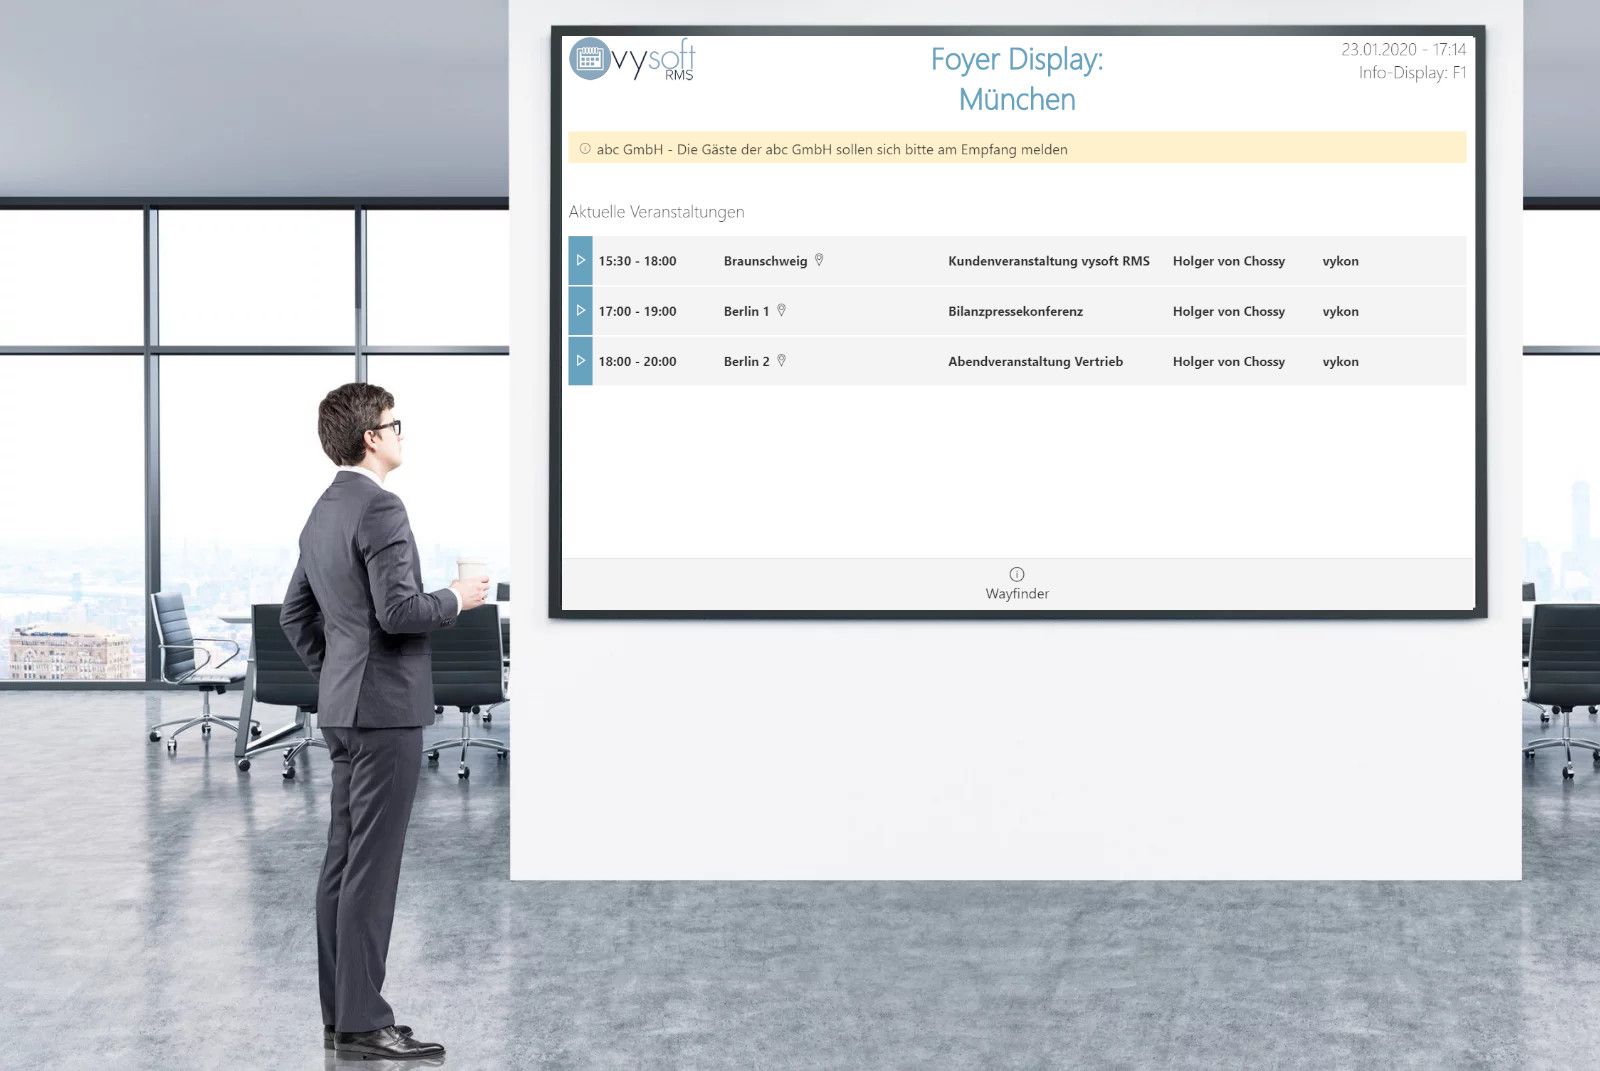 Information screen, welcome screen from vysoft integrated in the room booking system